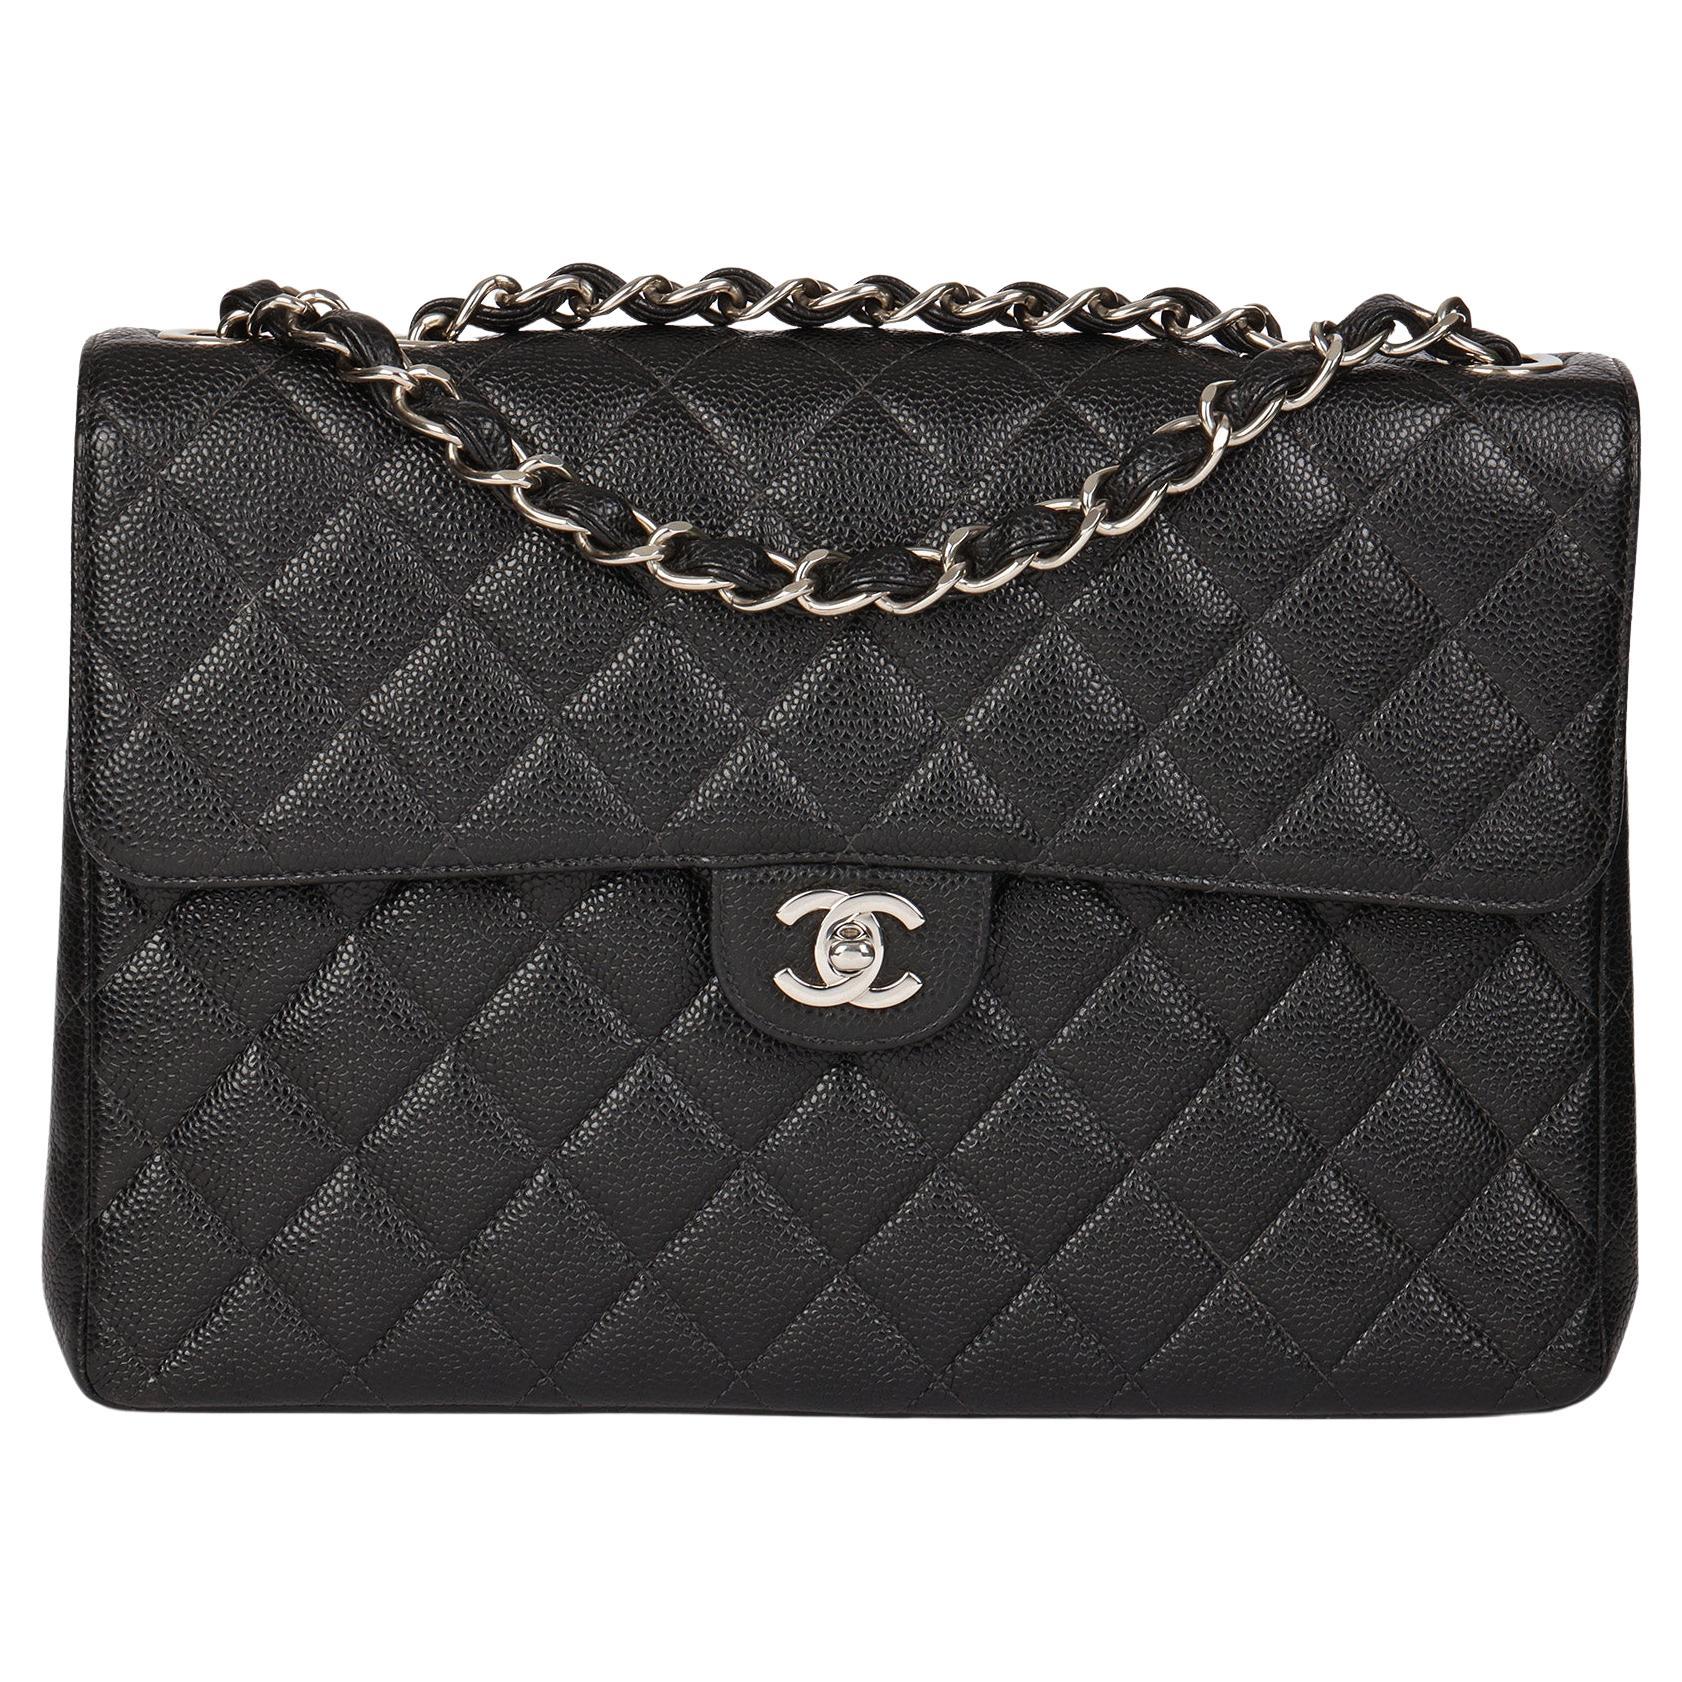 CHANEL Black Quilted and Smooth Lambskin Vintage Classic Shoulder